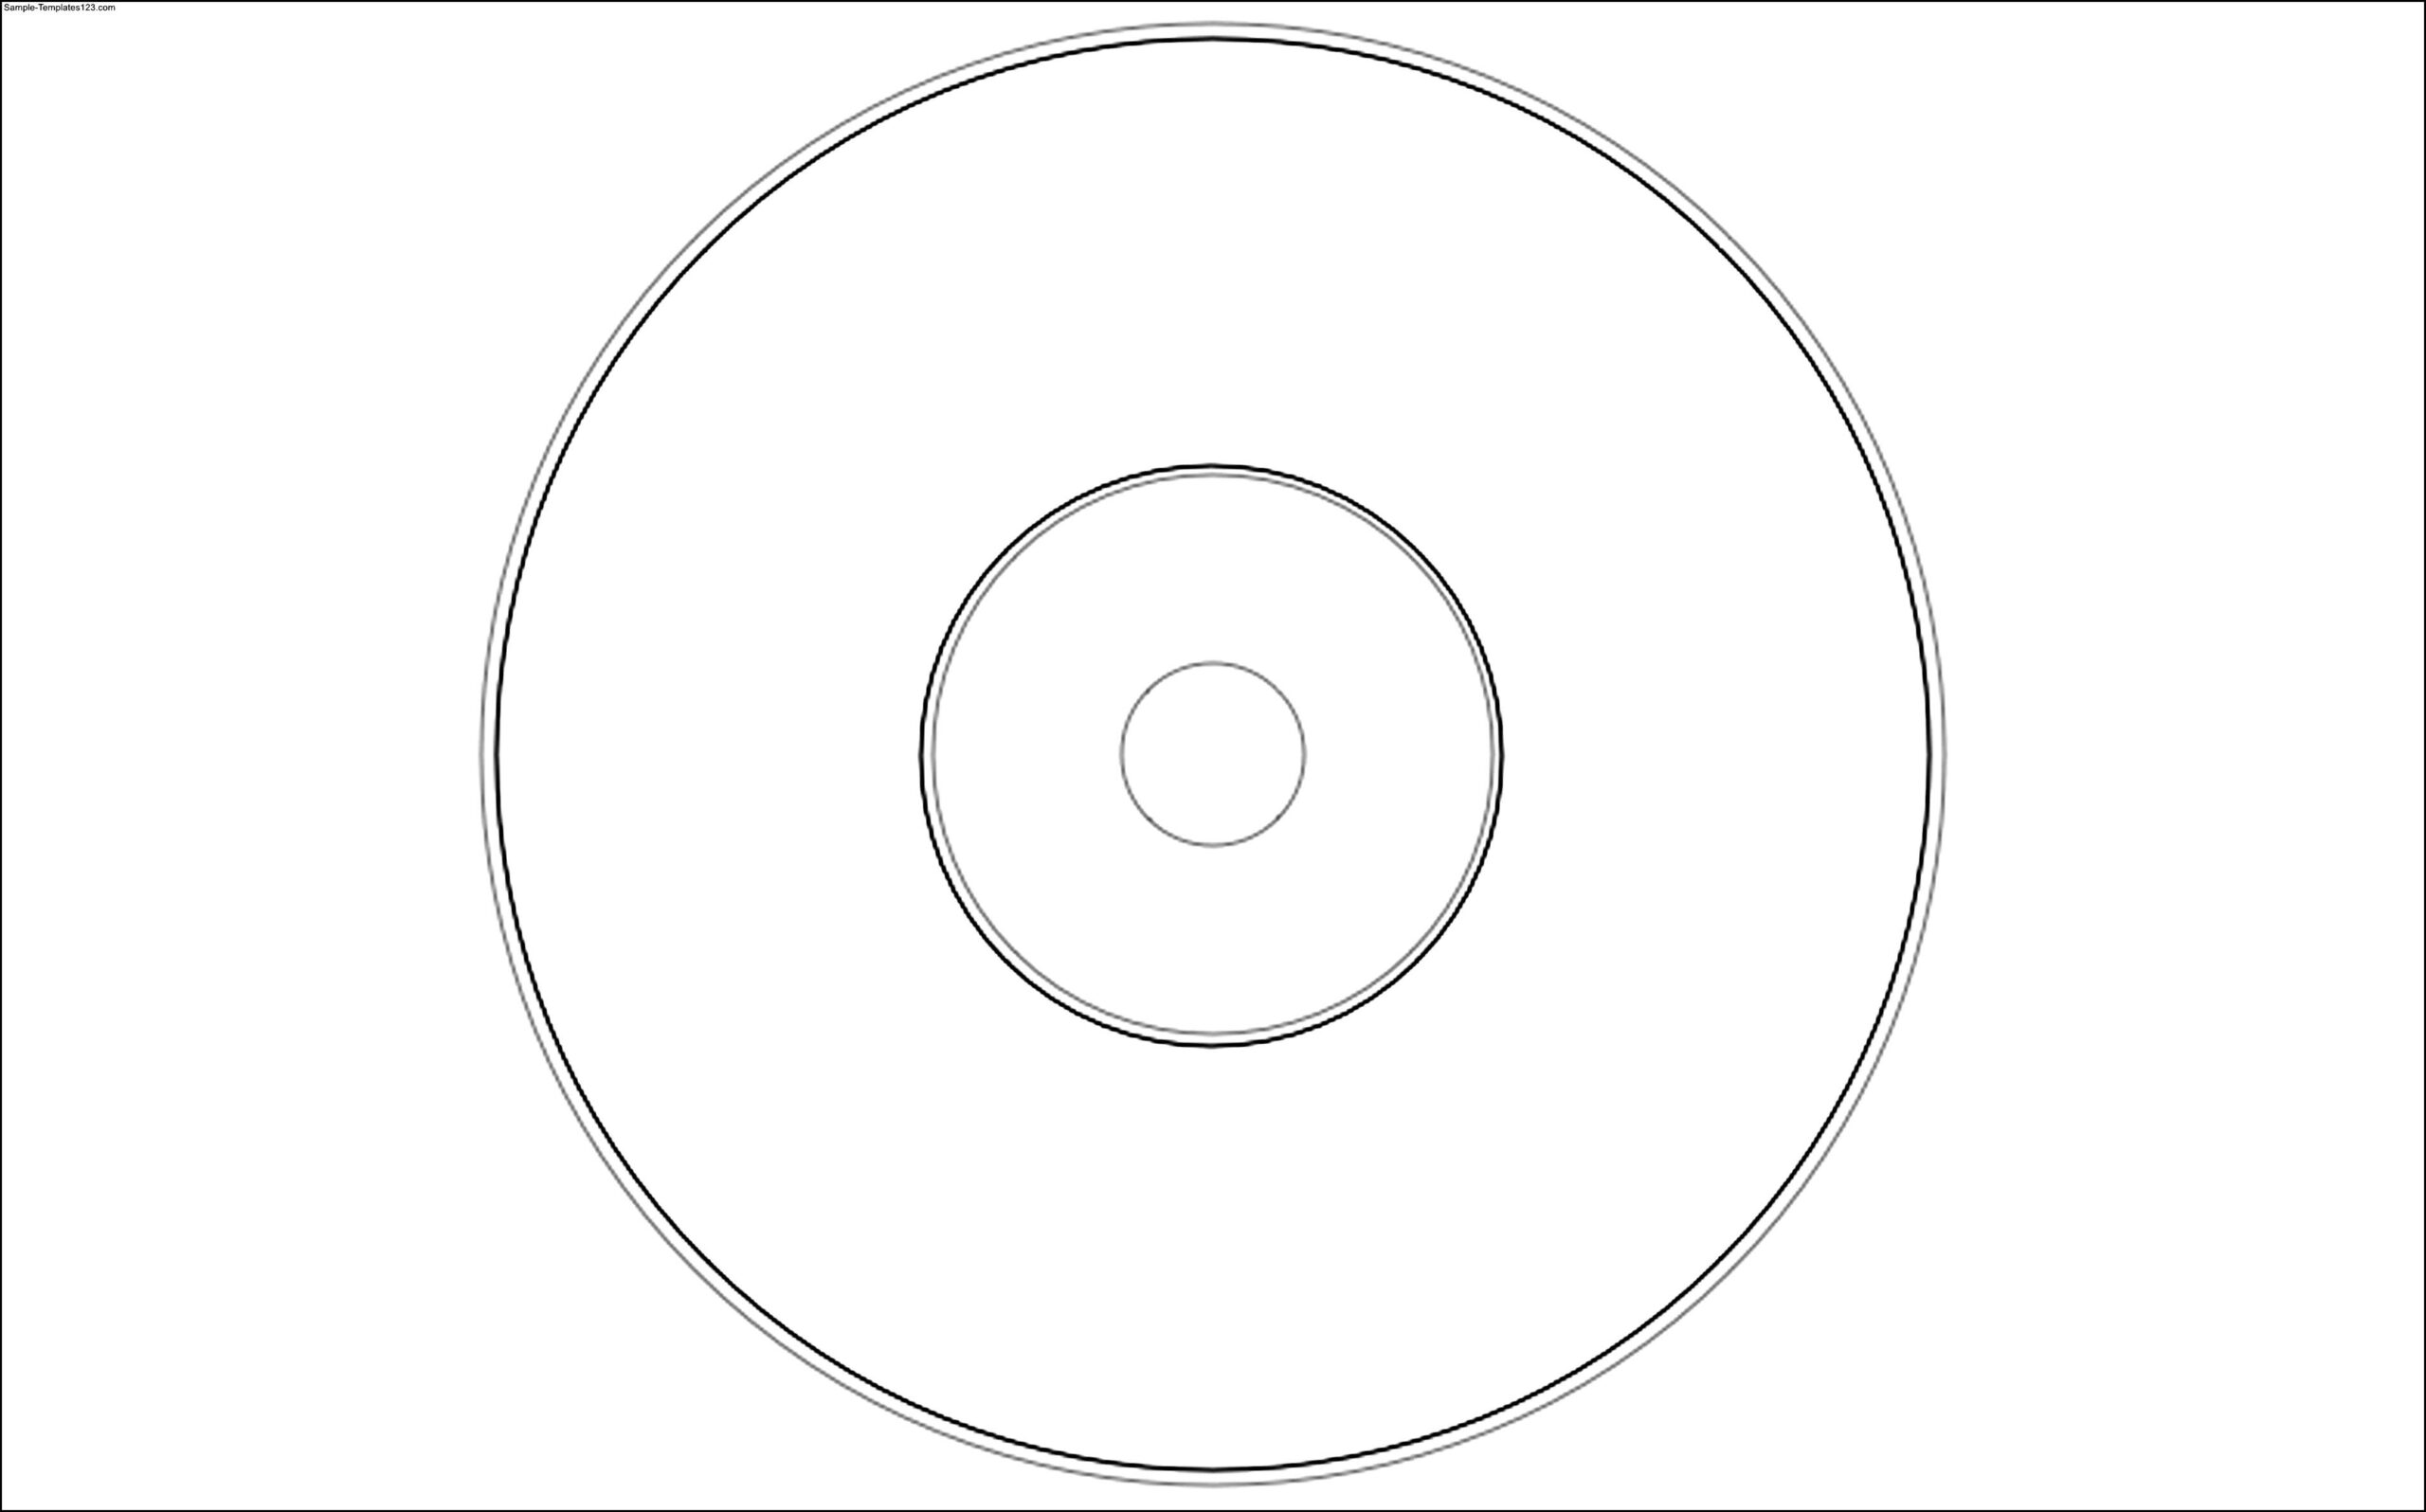 Cd Label Template Photoshop - Sample Templates - Sample Throughout Memorex Cd Labels Template